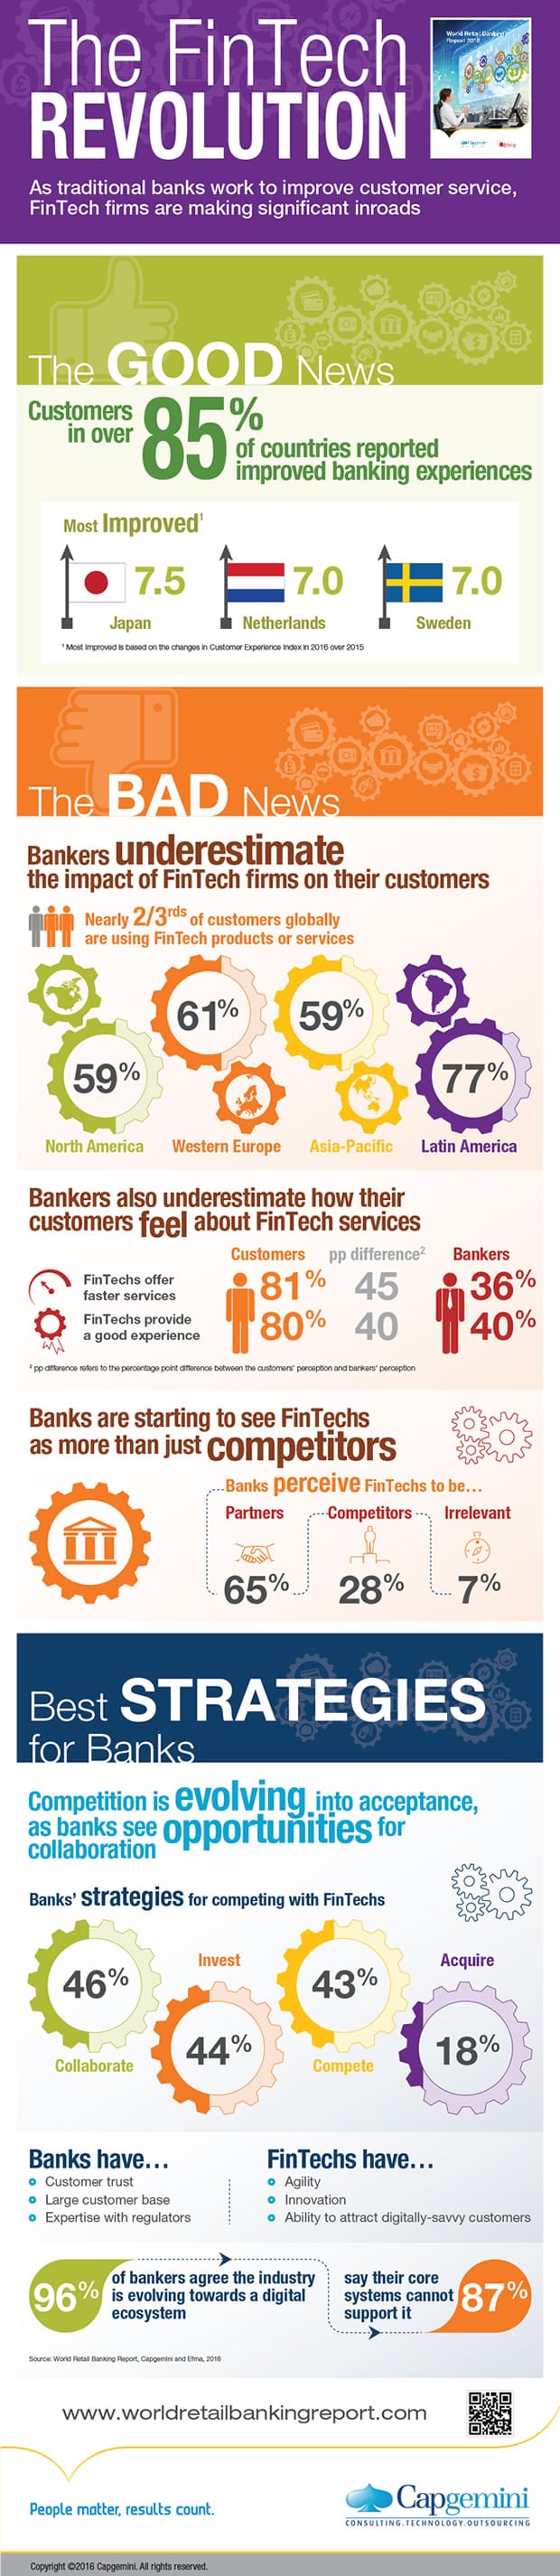 The FinTech Revolution - infographic World Retail Banking Report 2016 - source and more formats in press release